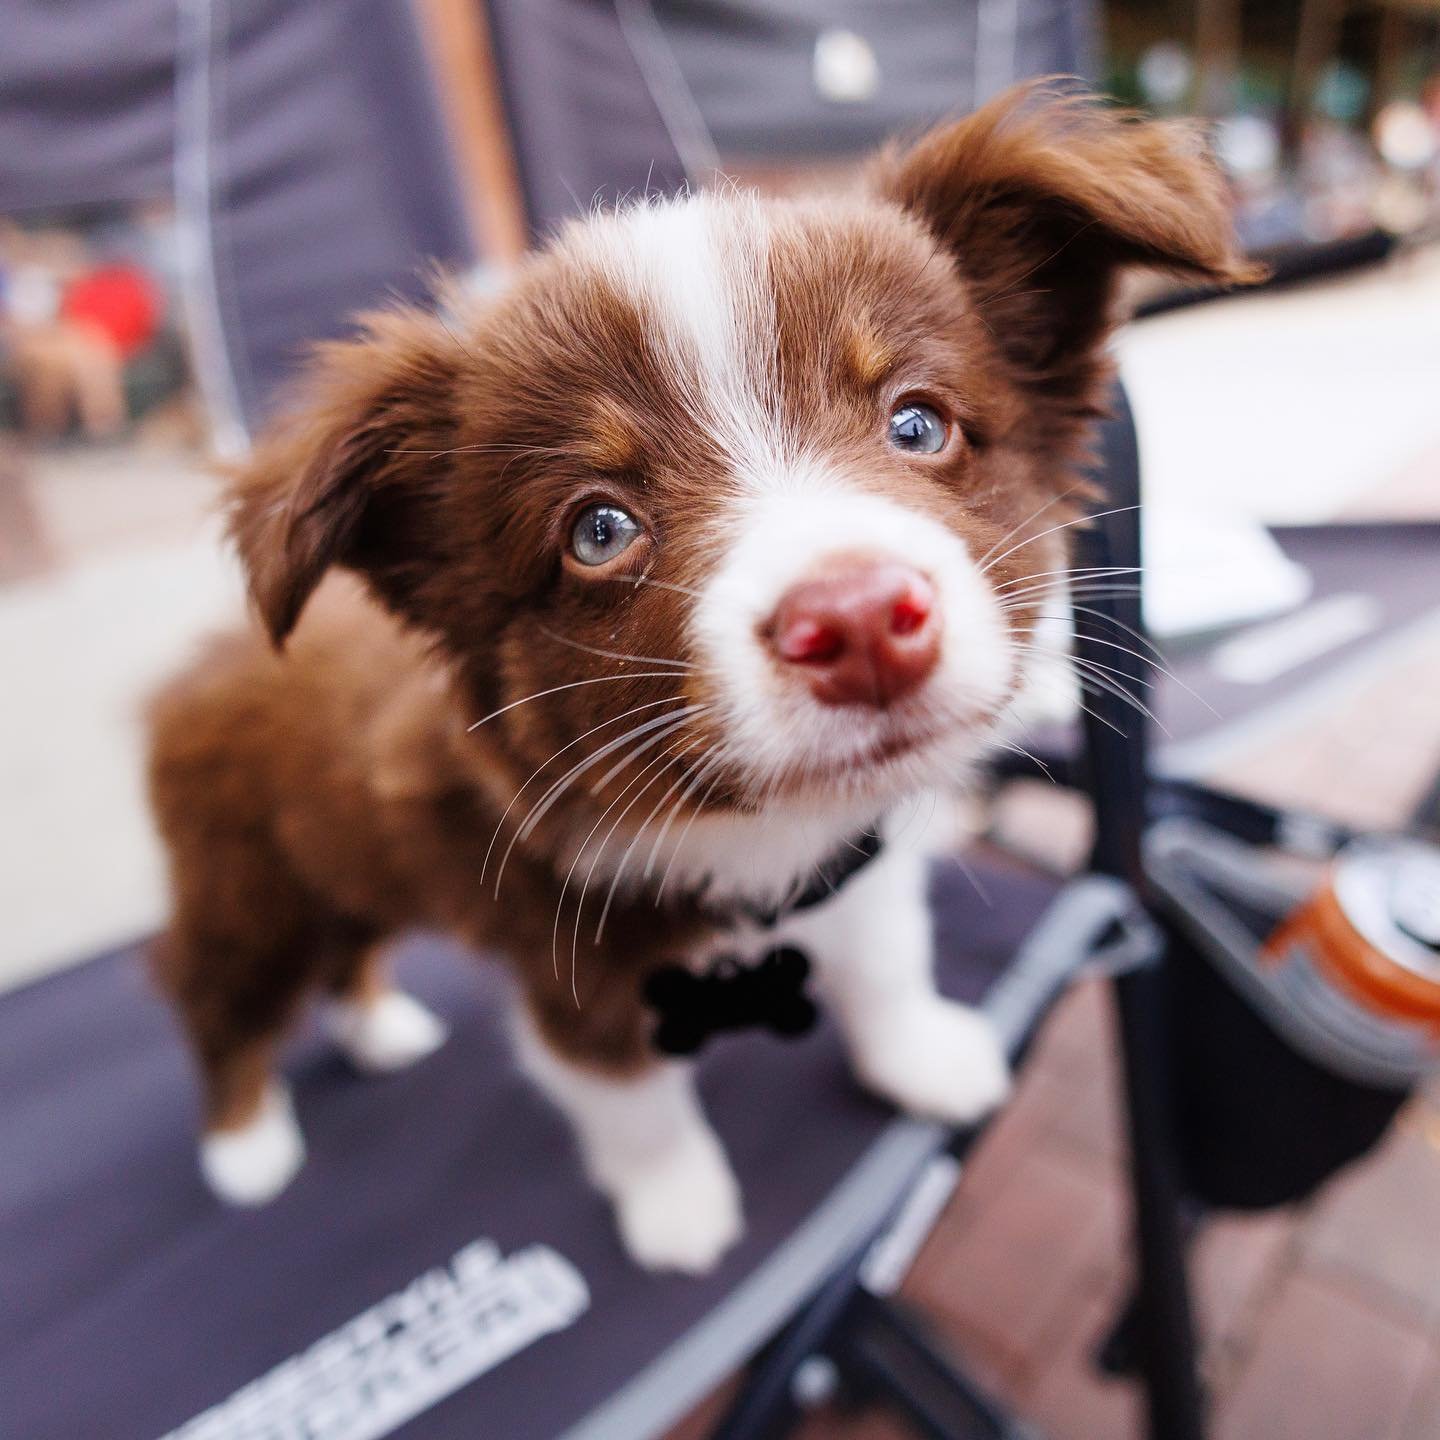 Uno, the baby Aussie with the baby blue eyes
Wants to say hi to every passerby 

Spotted in New Braunfels, TX